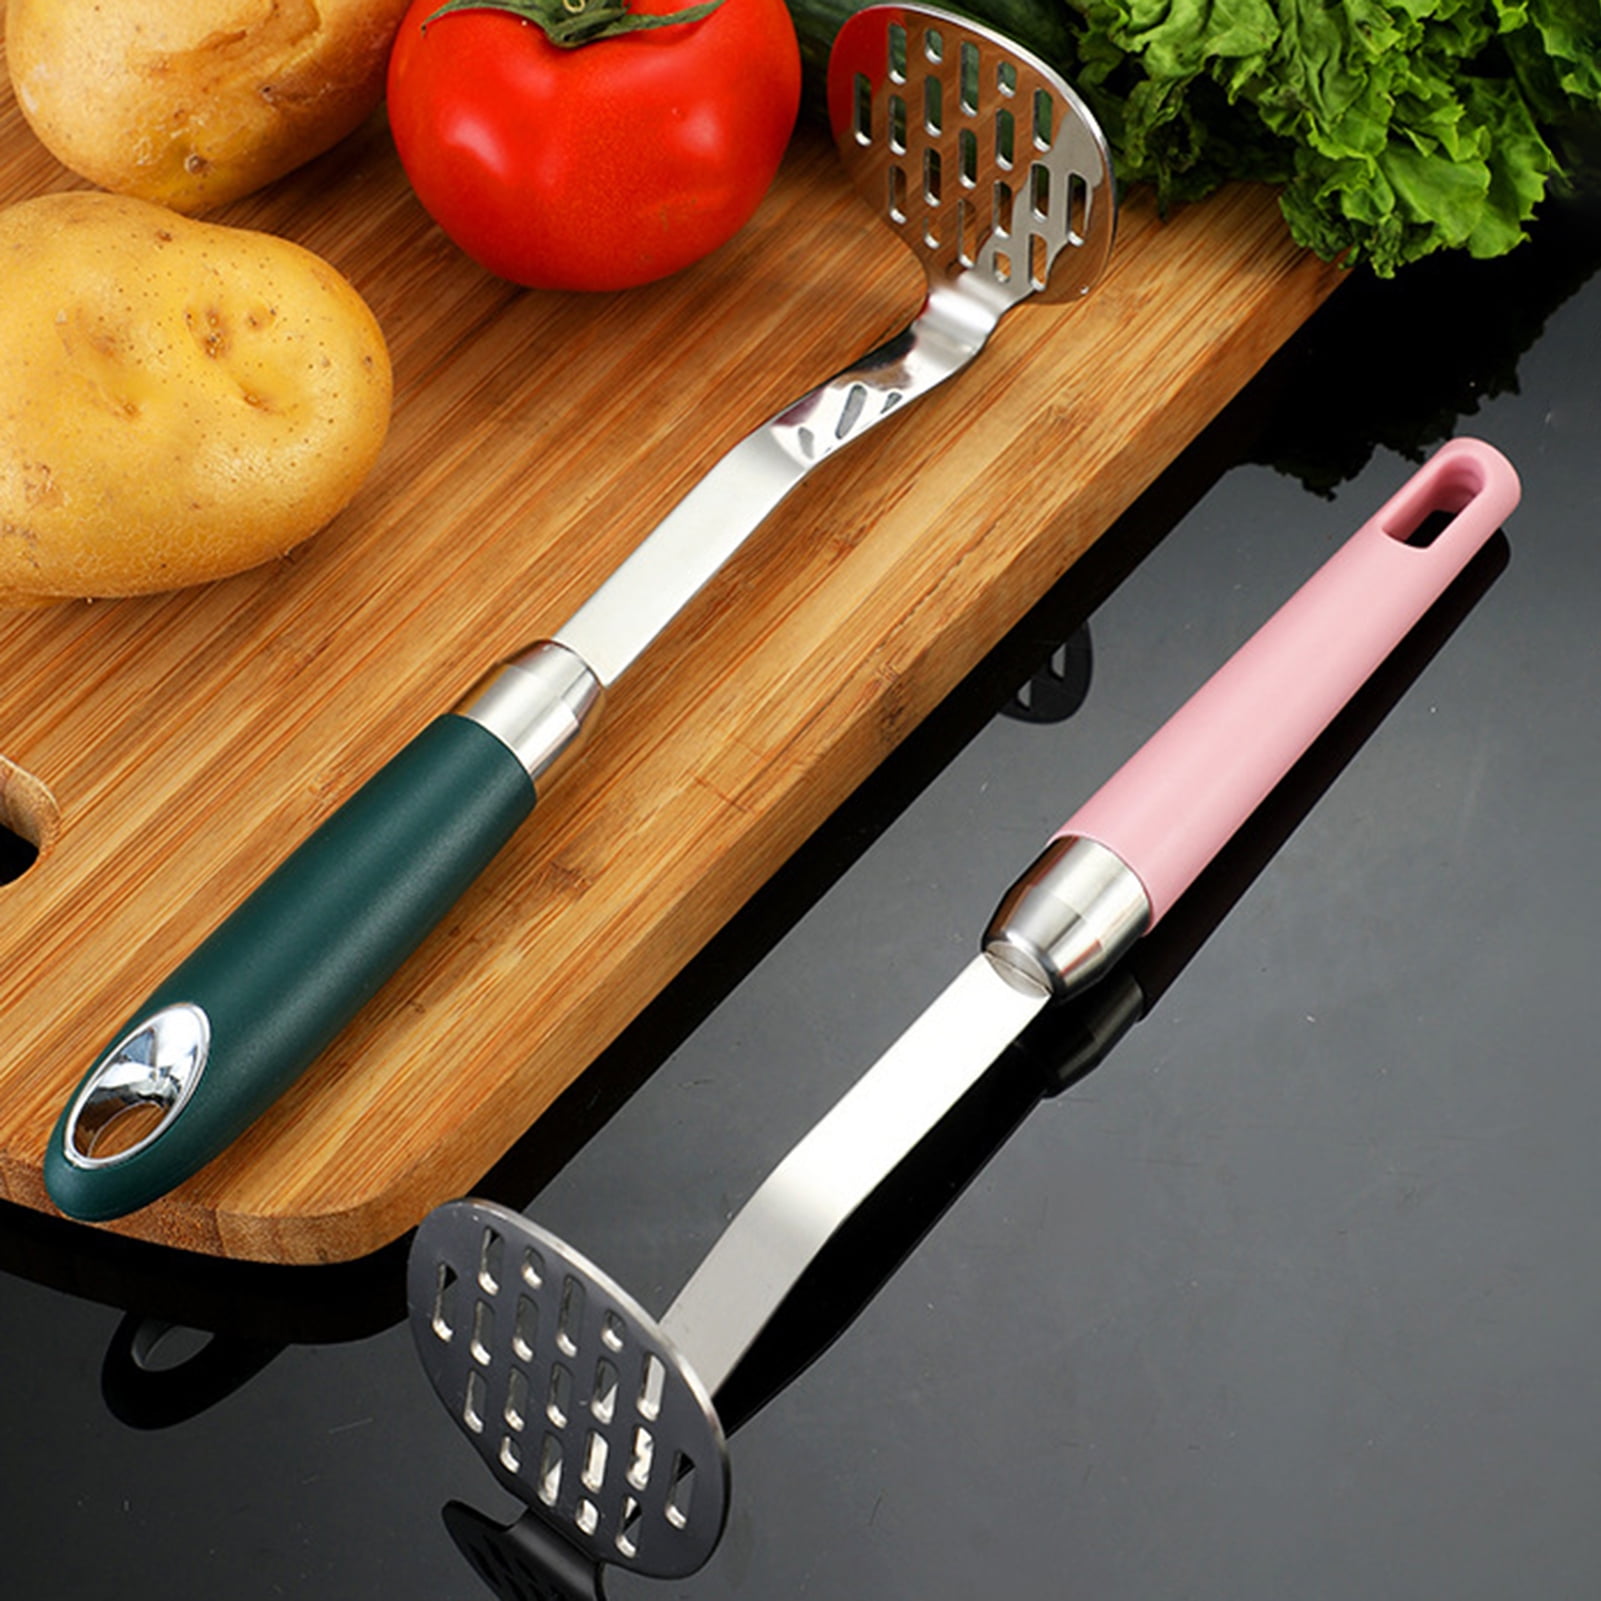 SAVORLIVING Stainless Steel Potato Masher, Hand Masher Tool with Thick  Handle, Round Hole Head Masher, Kitchen Crusher Gadgets for Mashed Bean